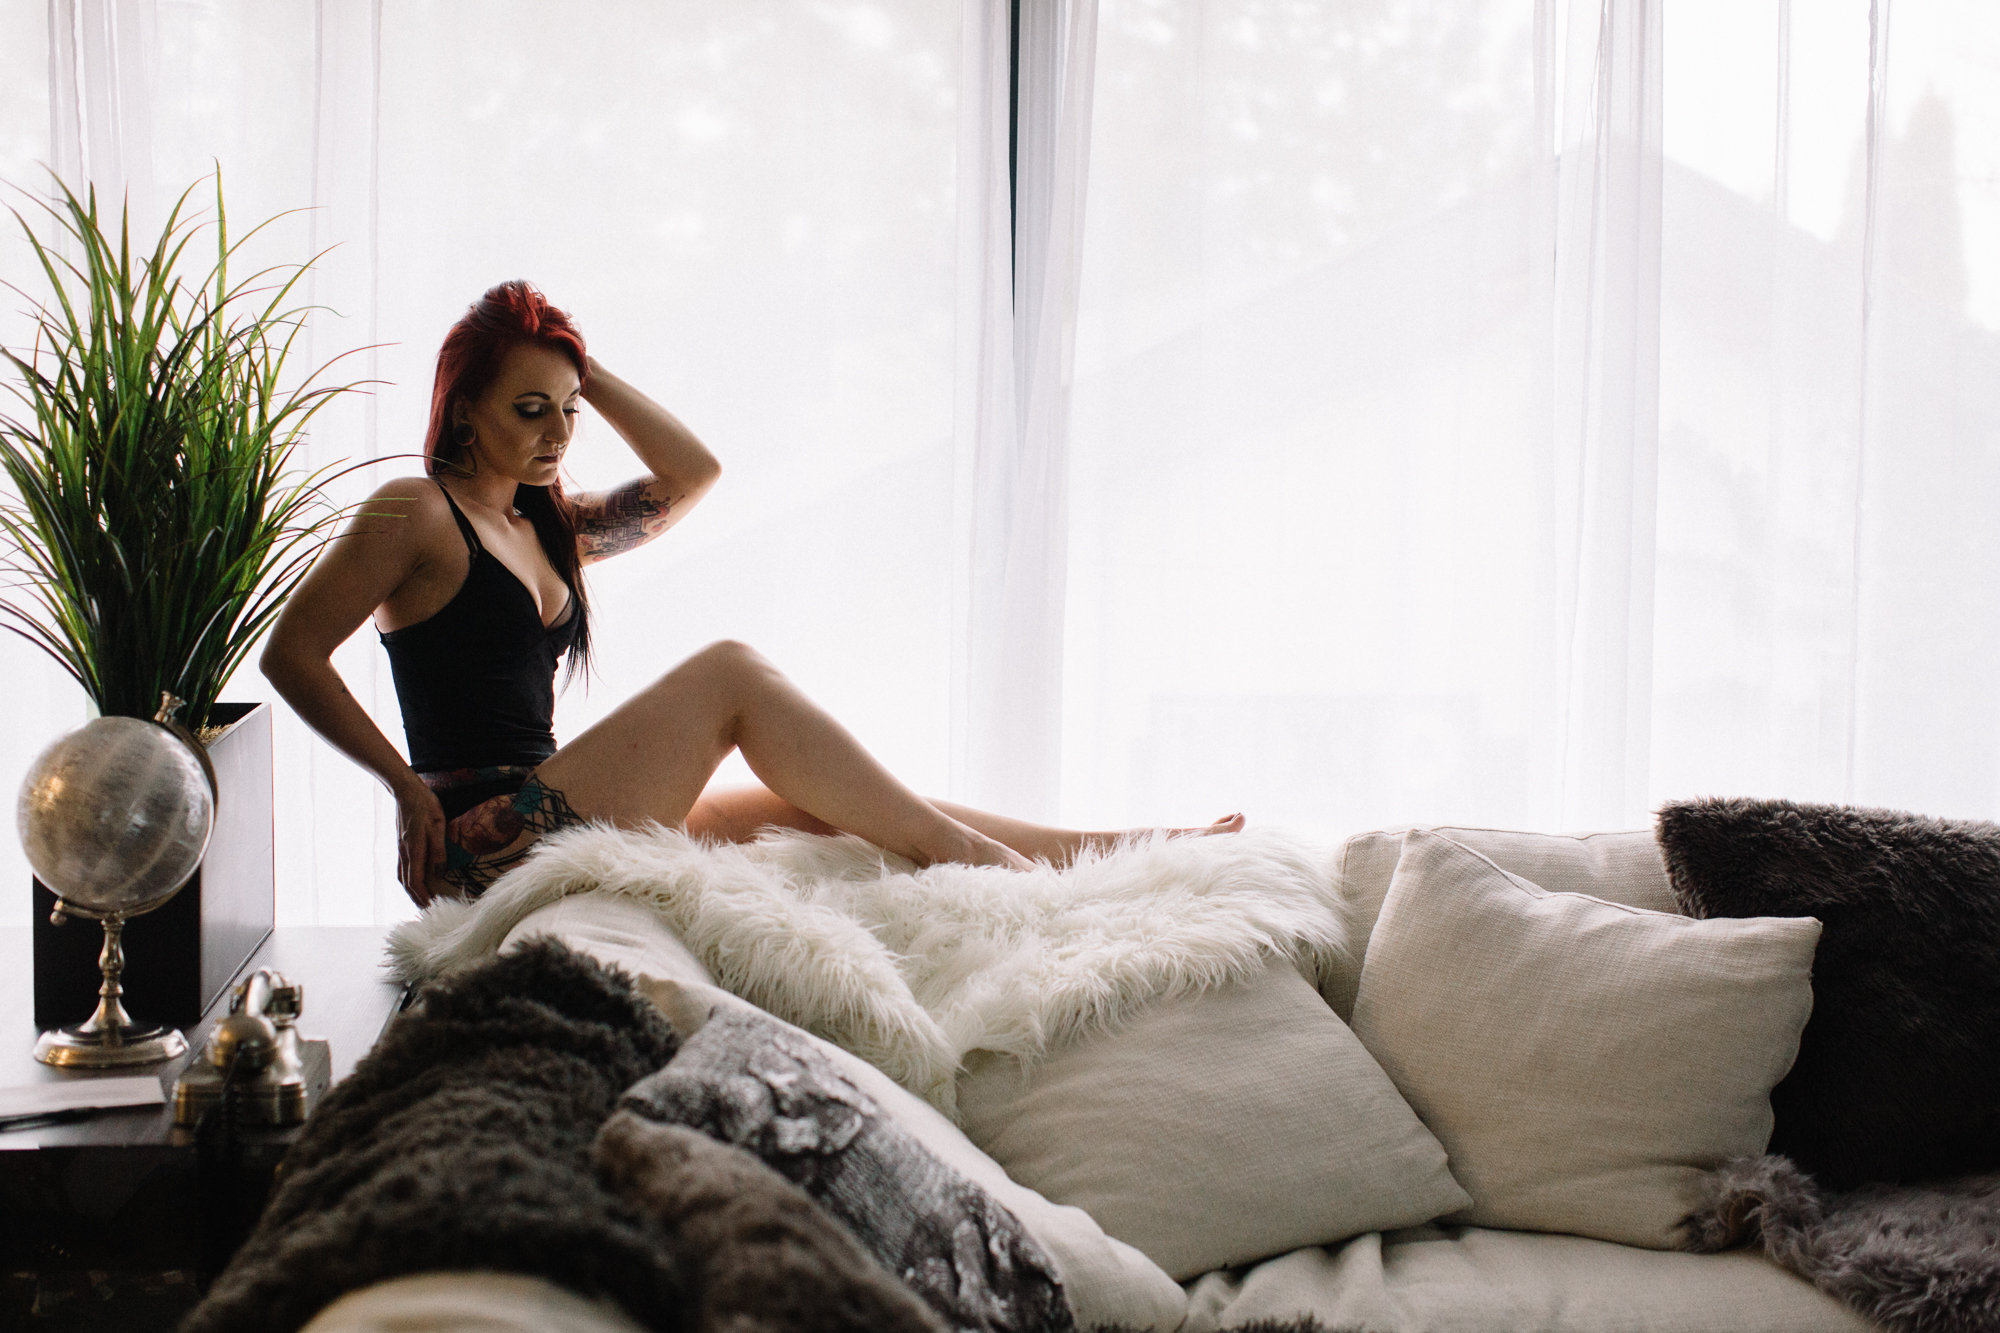 What to wear to a boudoir shoot